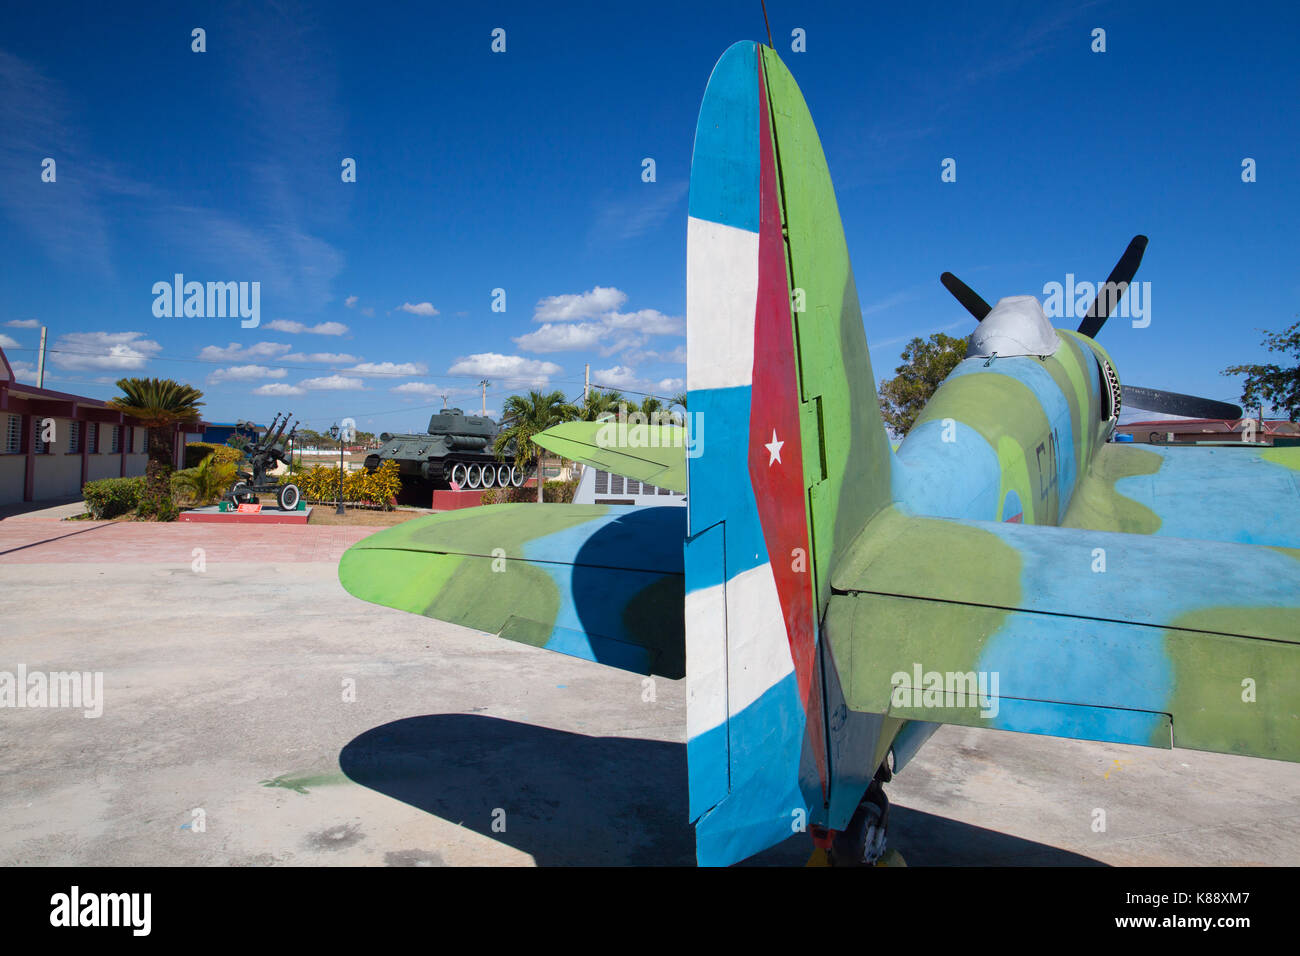 Playa Giron, Cuba - January 27,2017: The Bay of Pigs Museum. Tank and aircraft in front of the museum dedicated to the failed 1961 invasion. Stock Photo